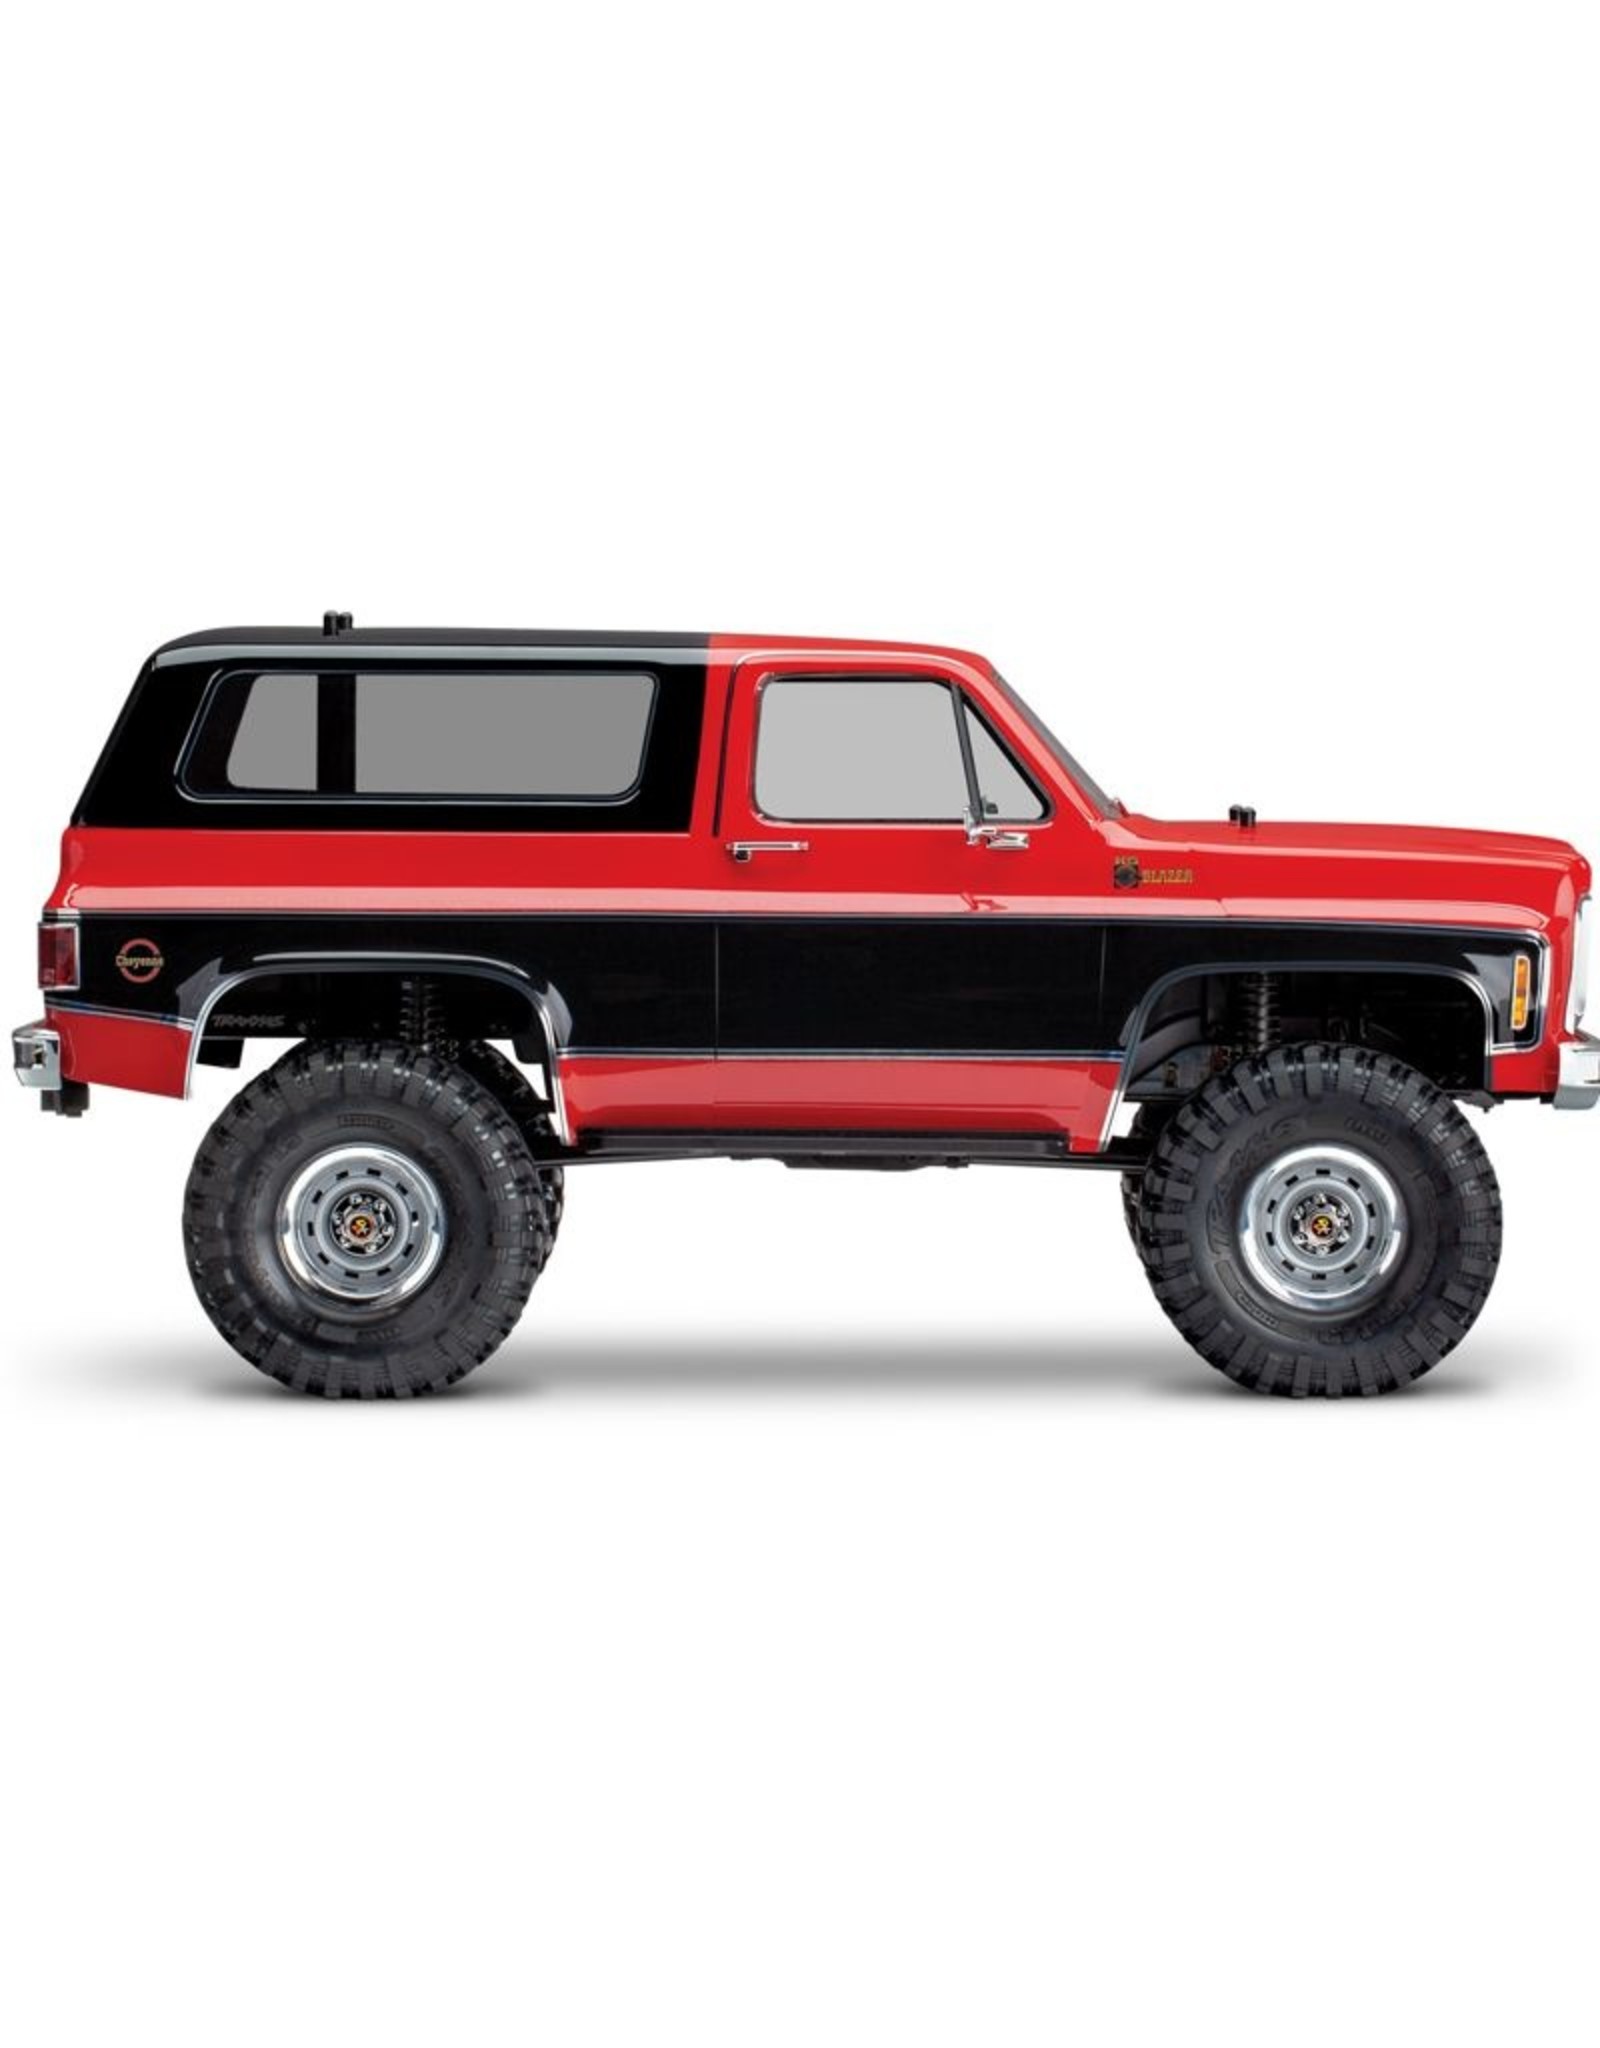 TRA TRA82076-4 Red - TRX-4® Scale and Trail® Crawler with 1979 Chevrolet Blazer Body: 1/10 Scale 4WD Electric Truck. Ready-to-Drive®